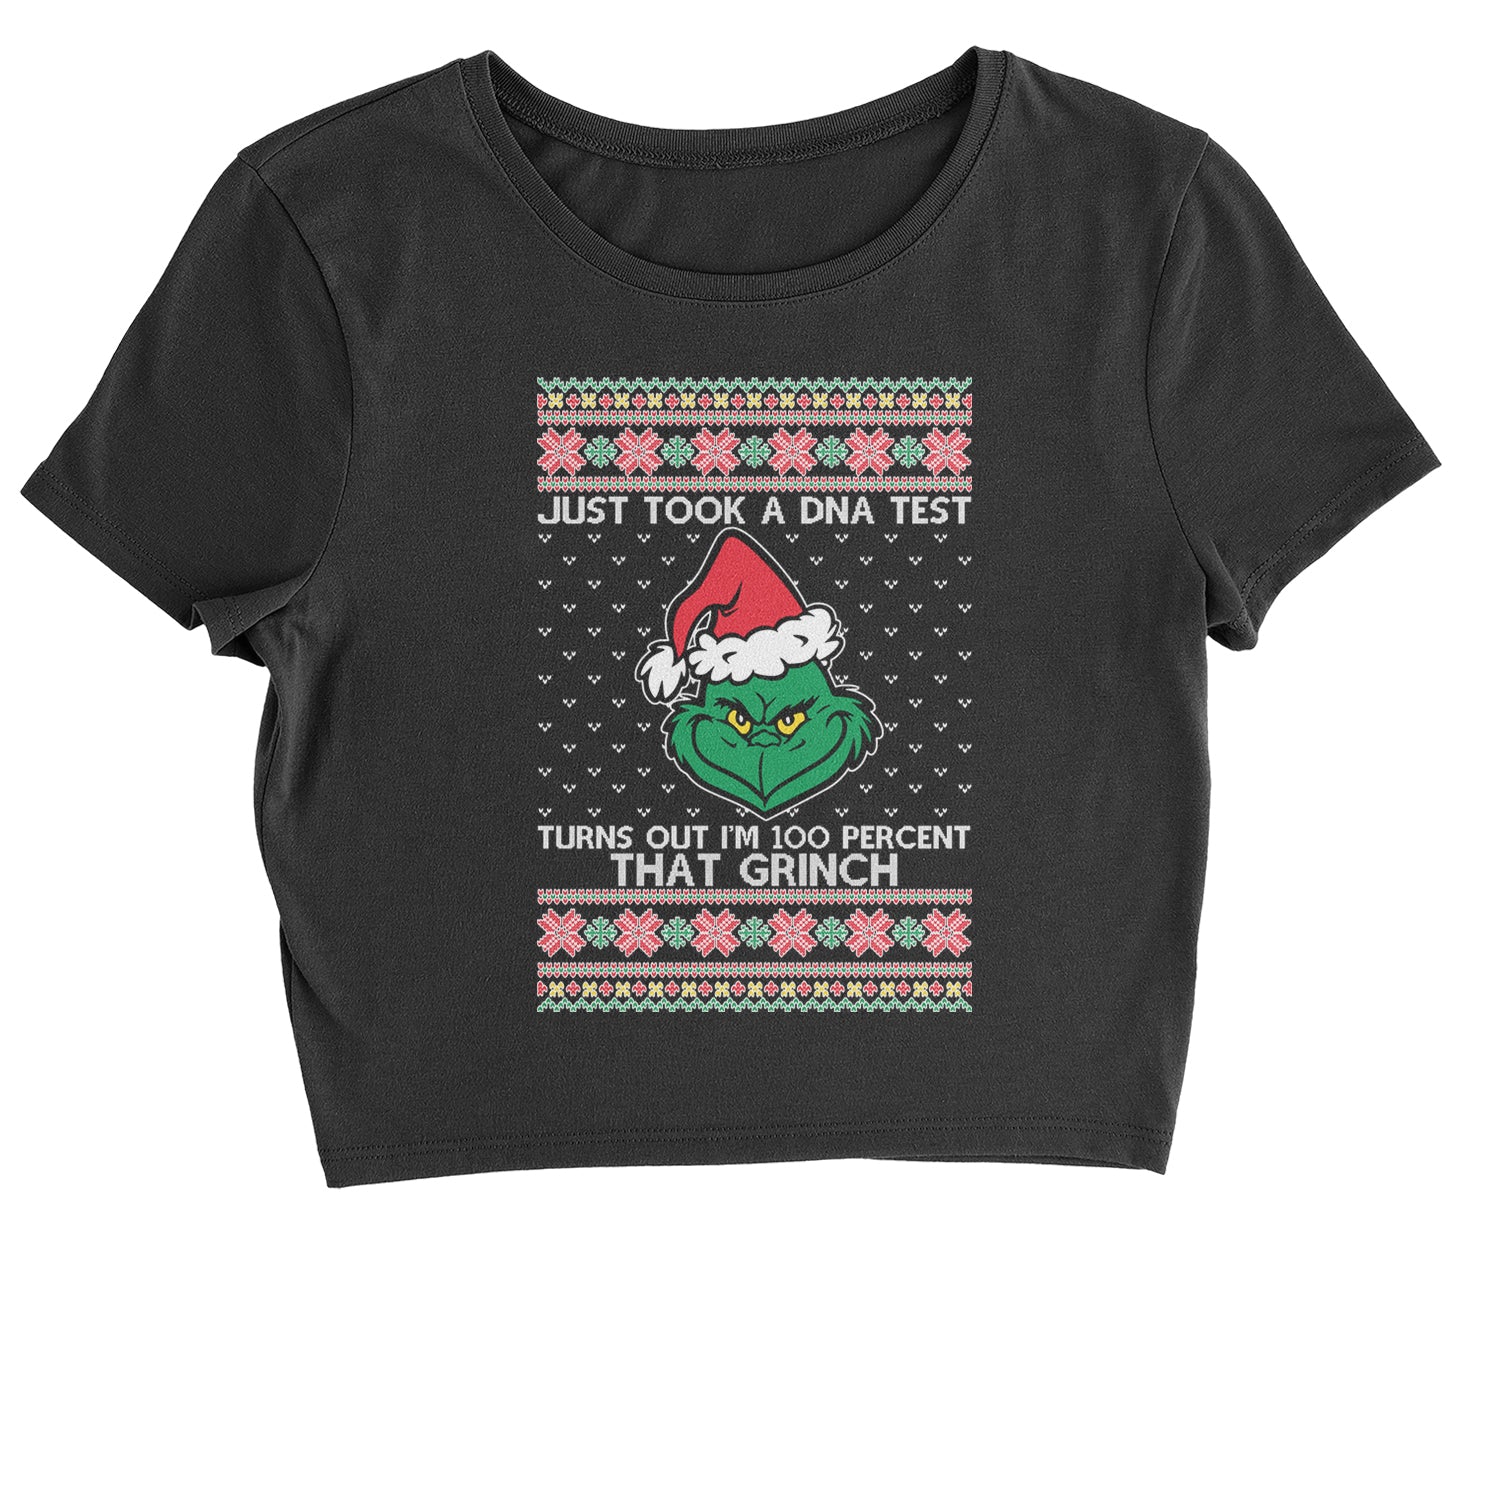 One Hundred Percent That Grinch Cropped T-Shirt christmas, grinch, sweater, sweatshirt, ugly, xmas by Expression Tees